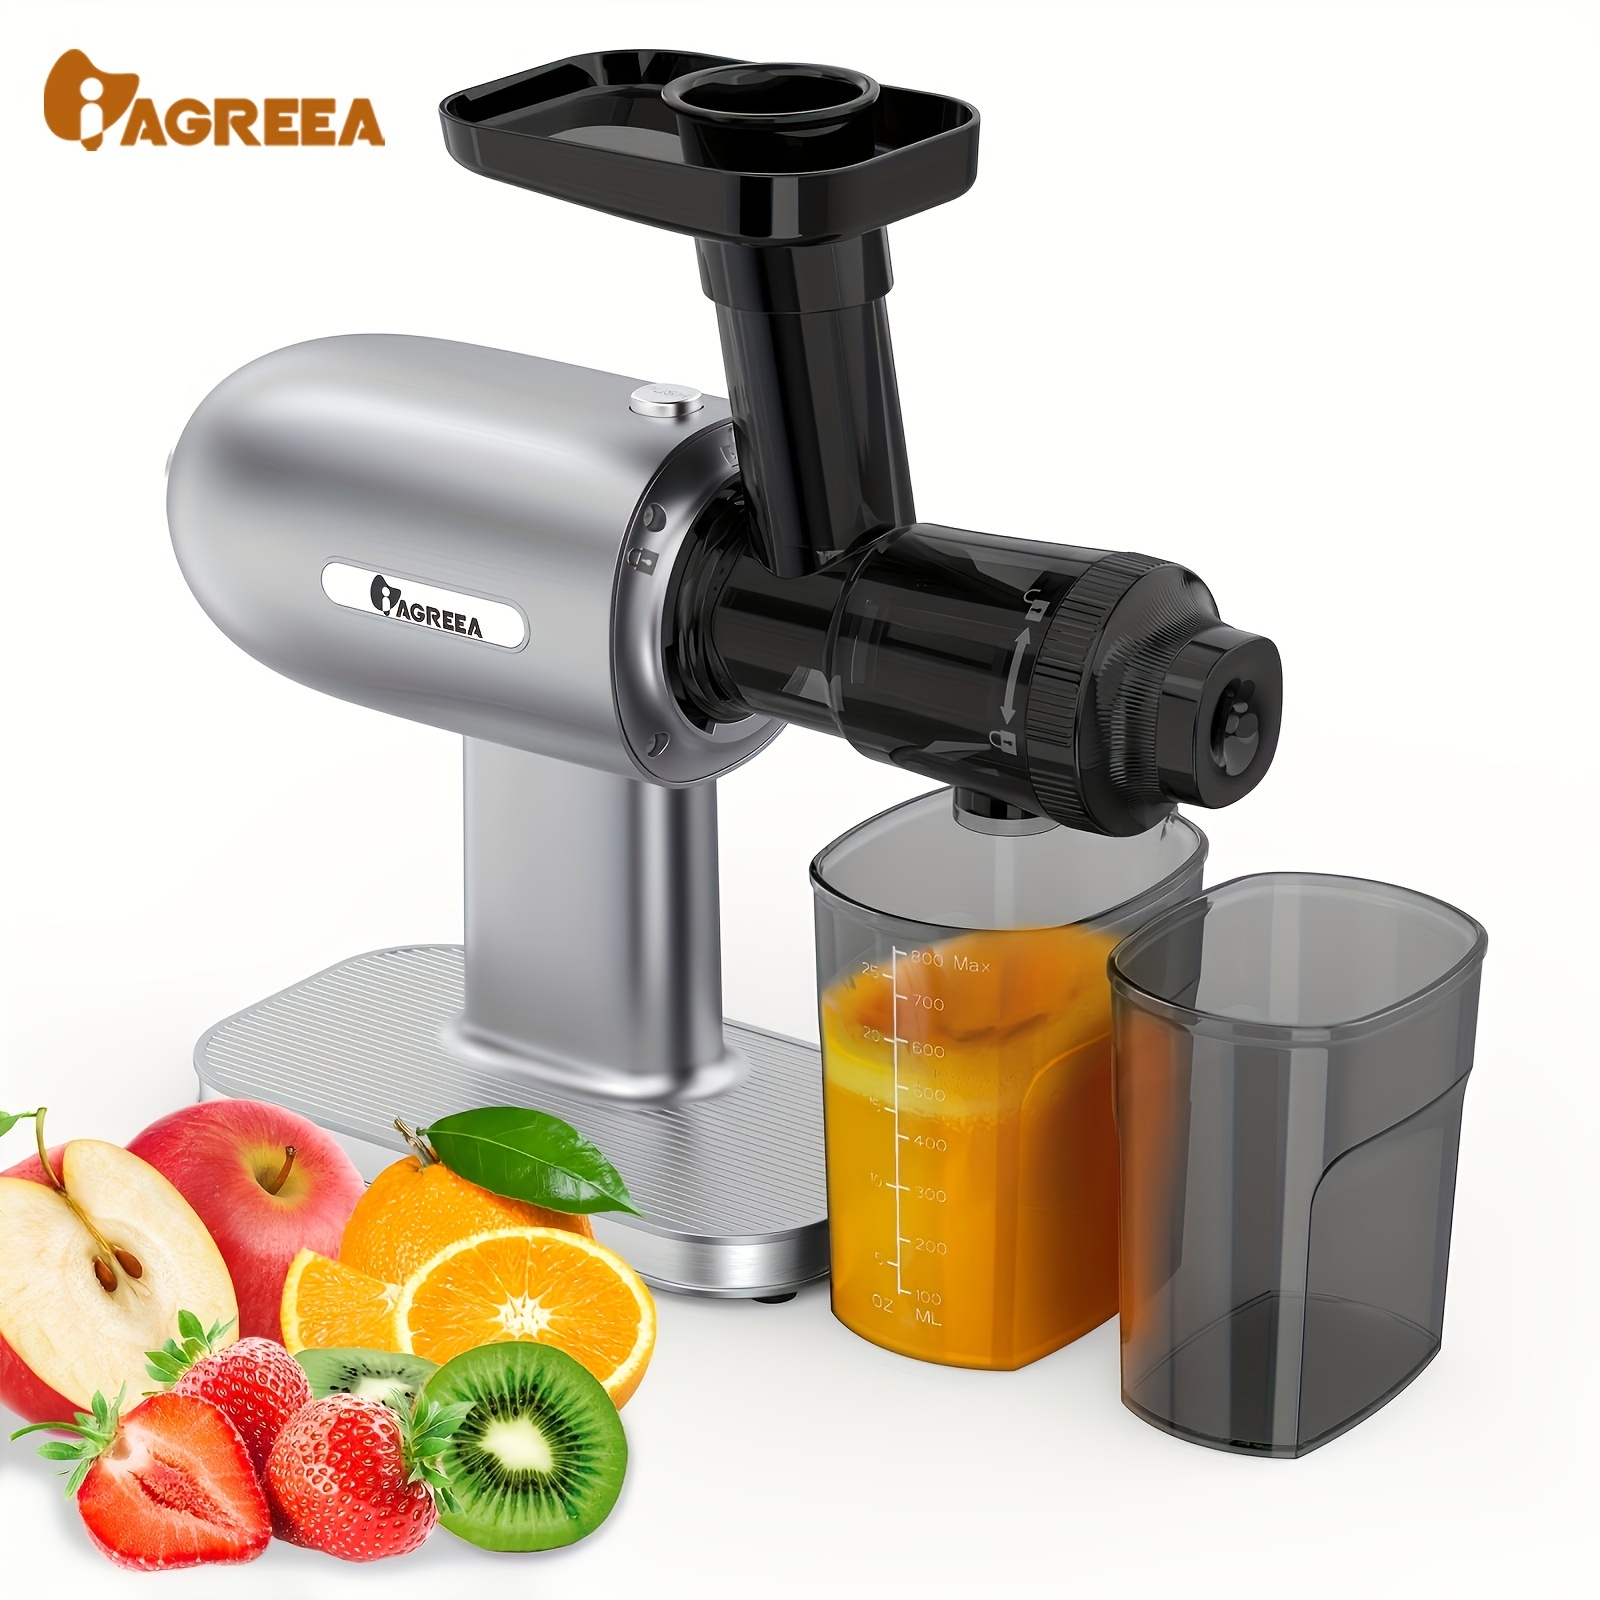 iagreea cold press juicer slow juicer machines for vegetable and fruit compact small space saving masticating juicer ultra power juicer maker with reverse function details 7